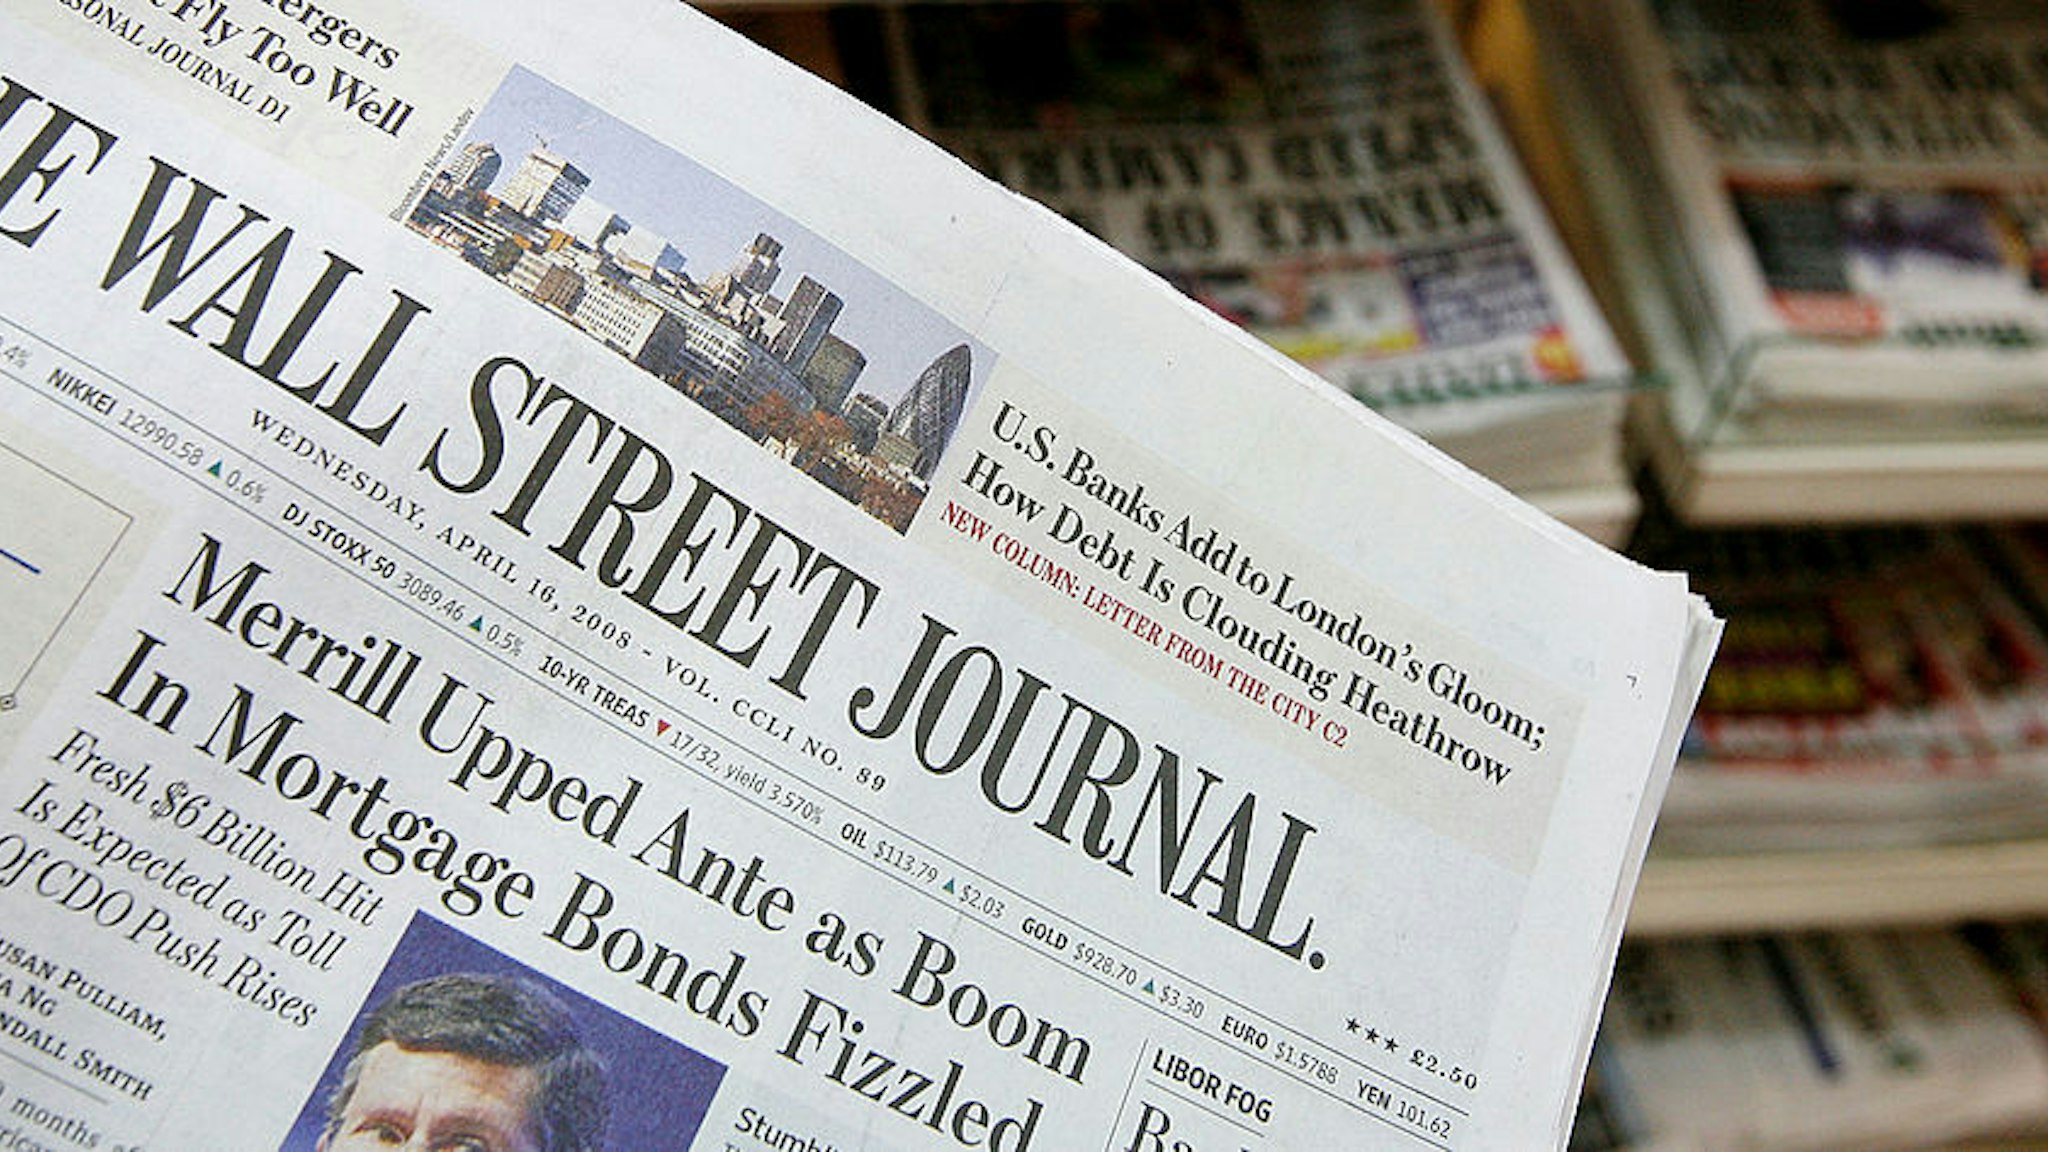 Wall Street Journal U.S. Edition Goes On Sale In London For The First Time